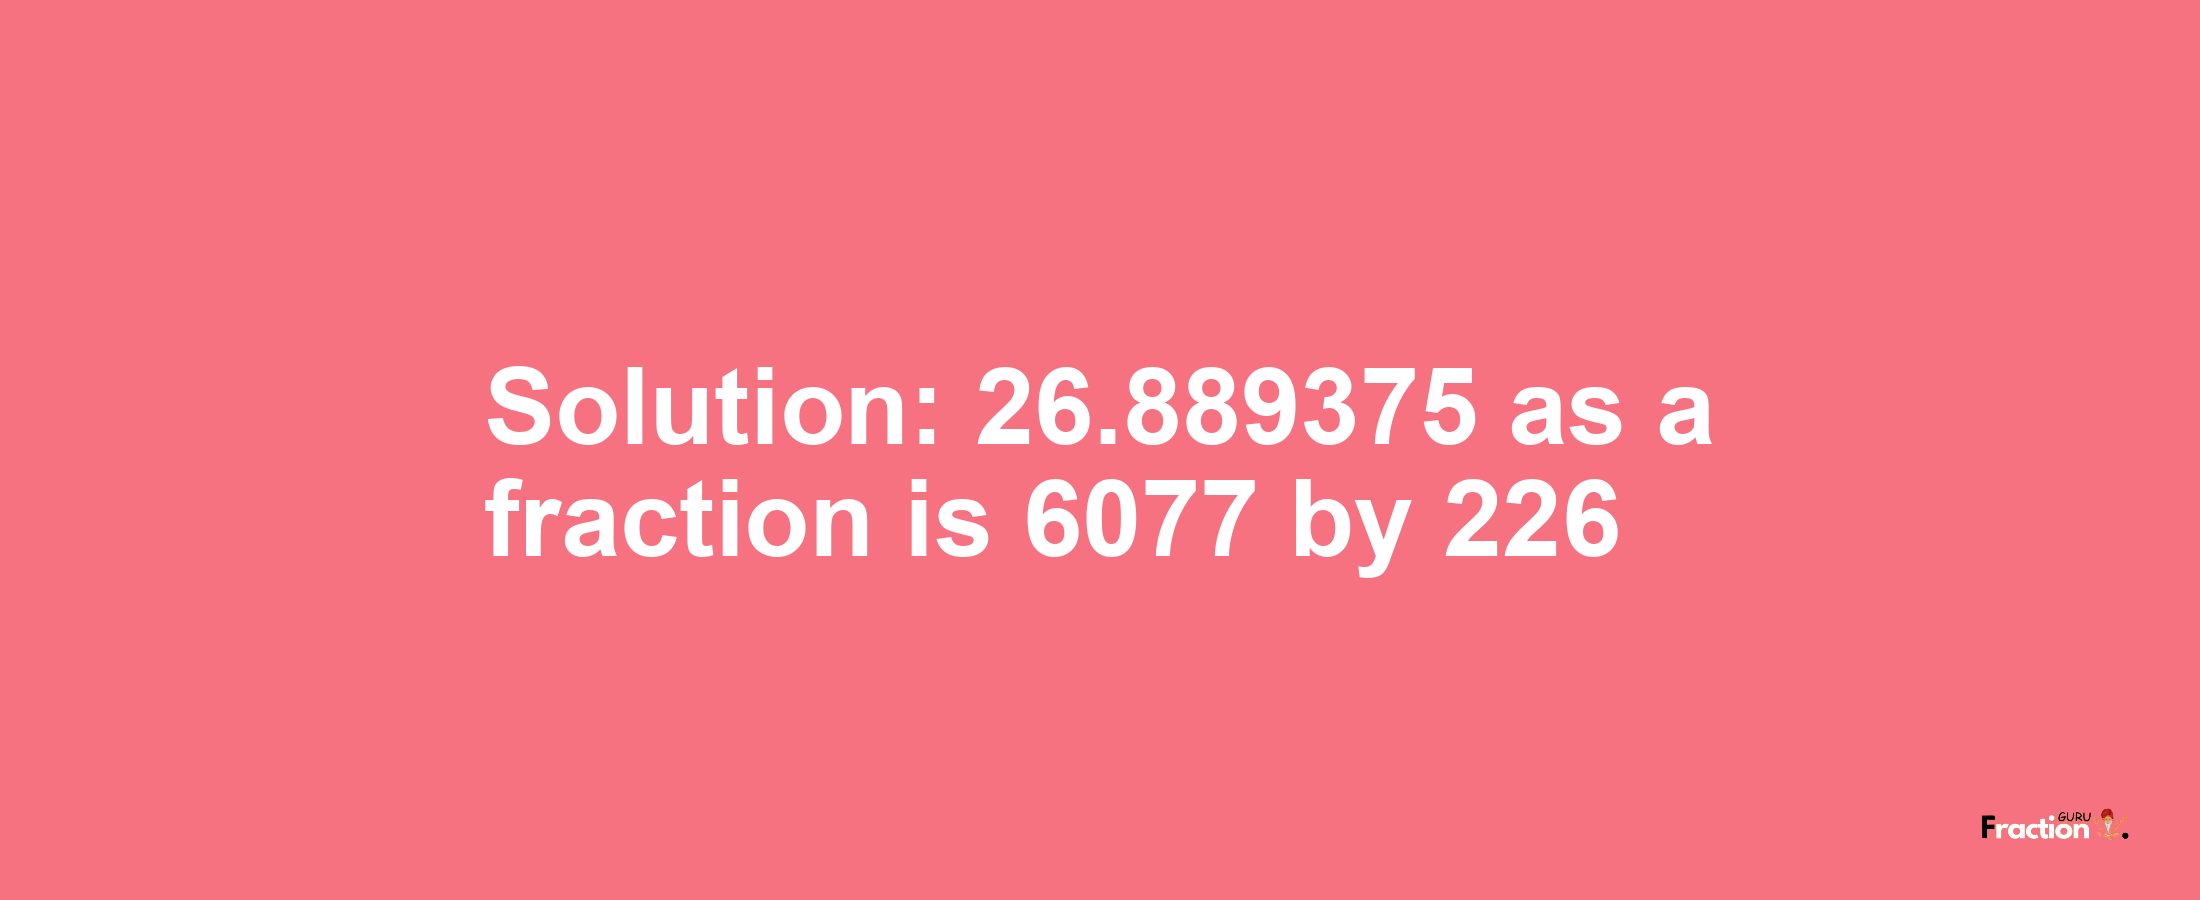 Solution:26.889375 as a fraction is 6077/226